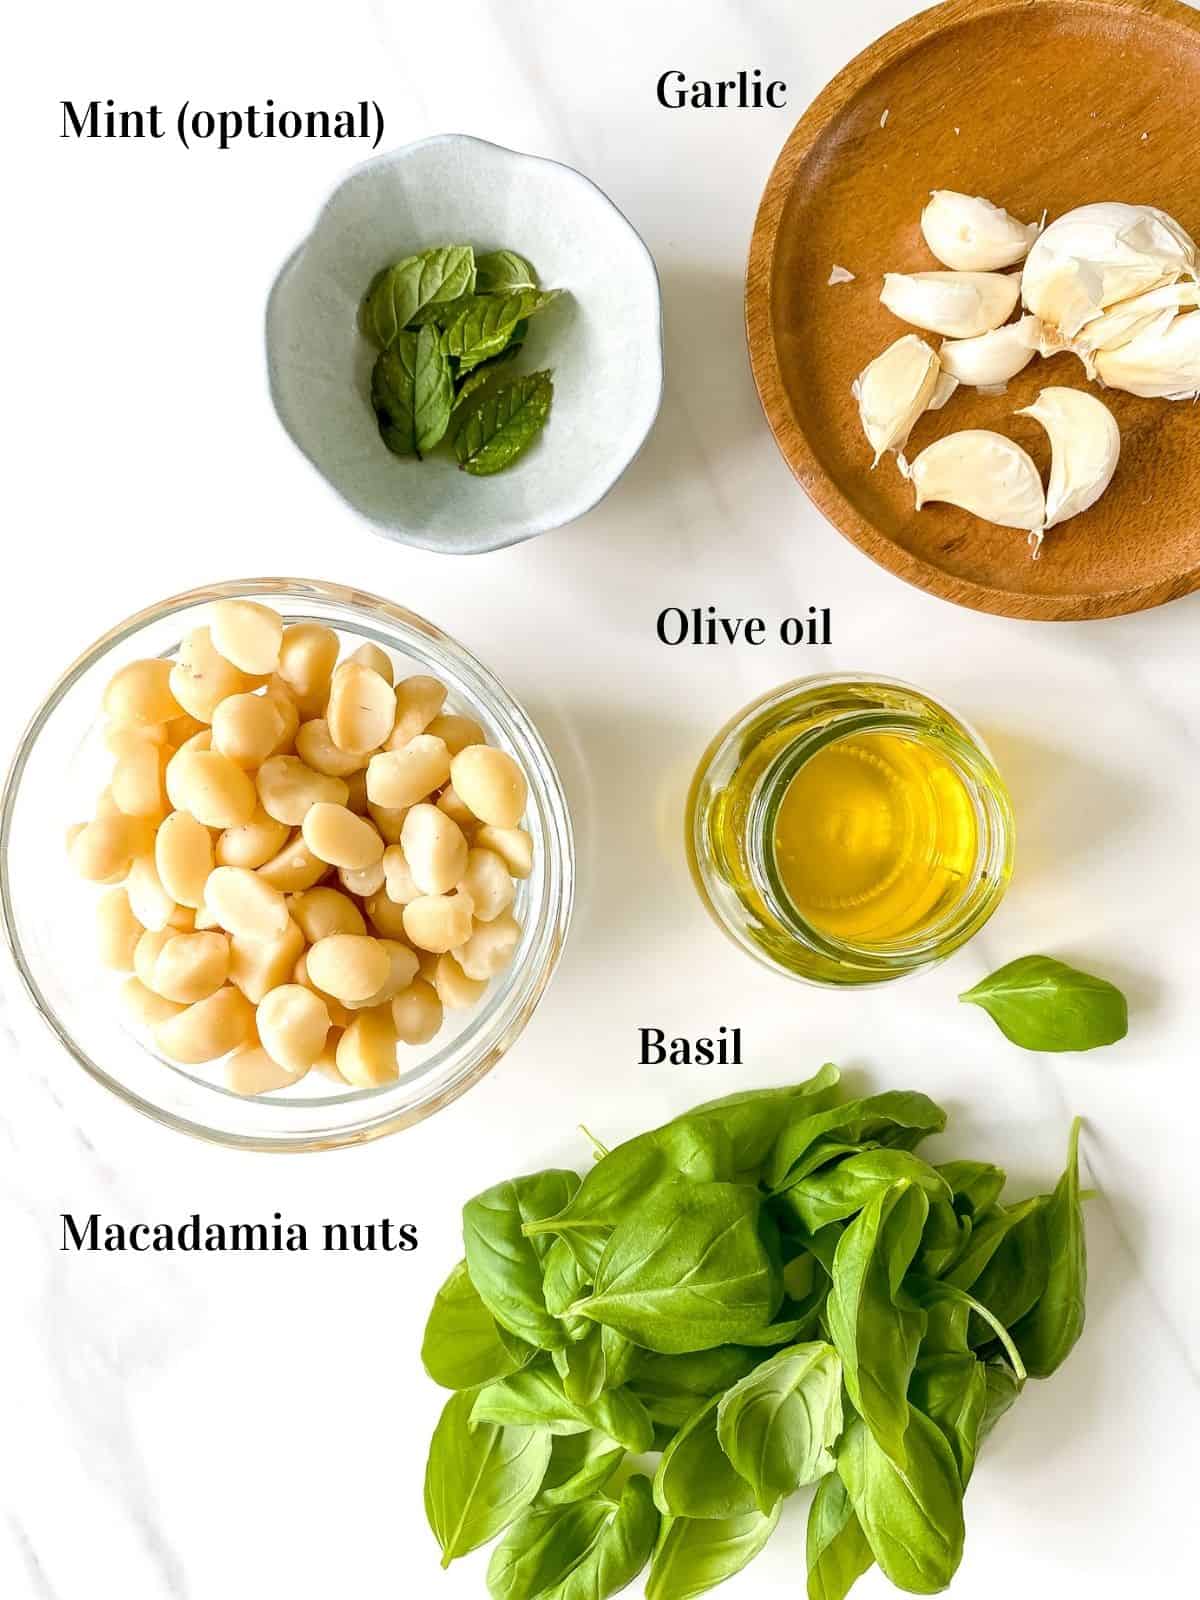 small bowls of mint, garlic, macadamia nuts, basil and olive oil.